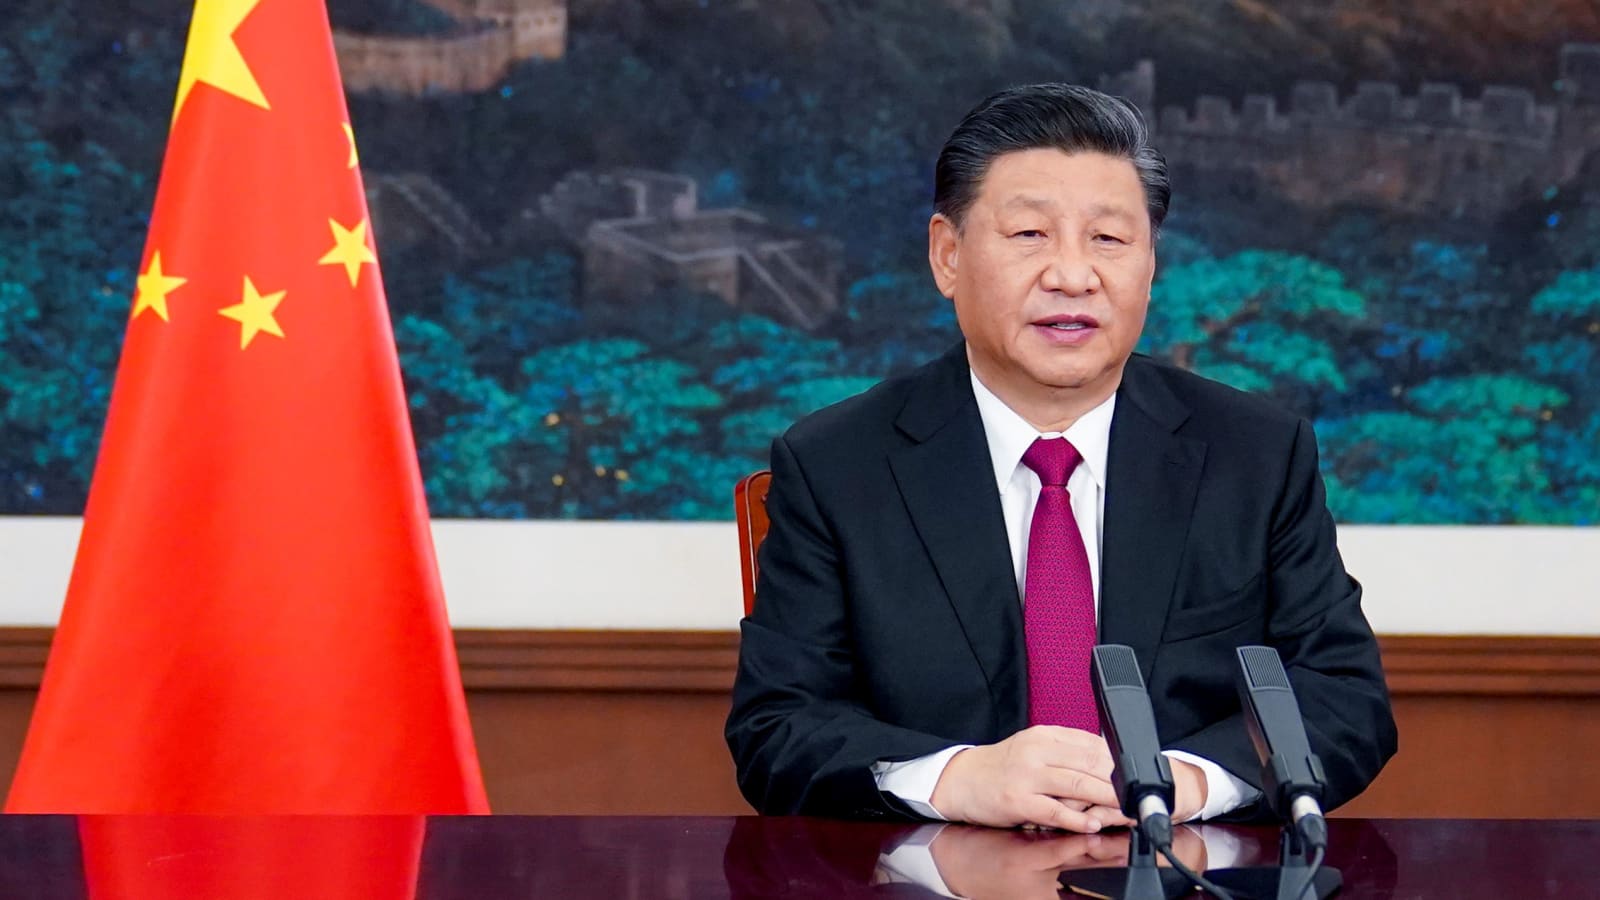 Xi Jinping rumoured to be suffering from brain aneurysm: Report